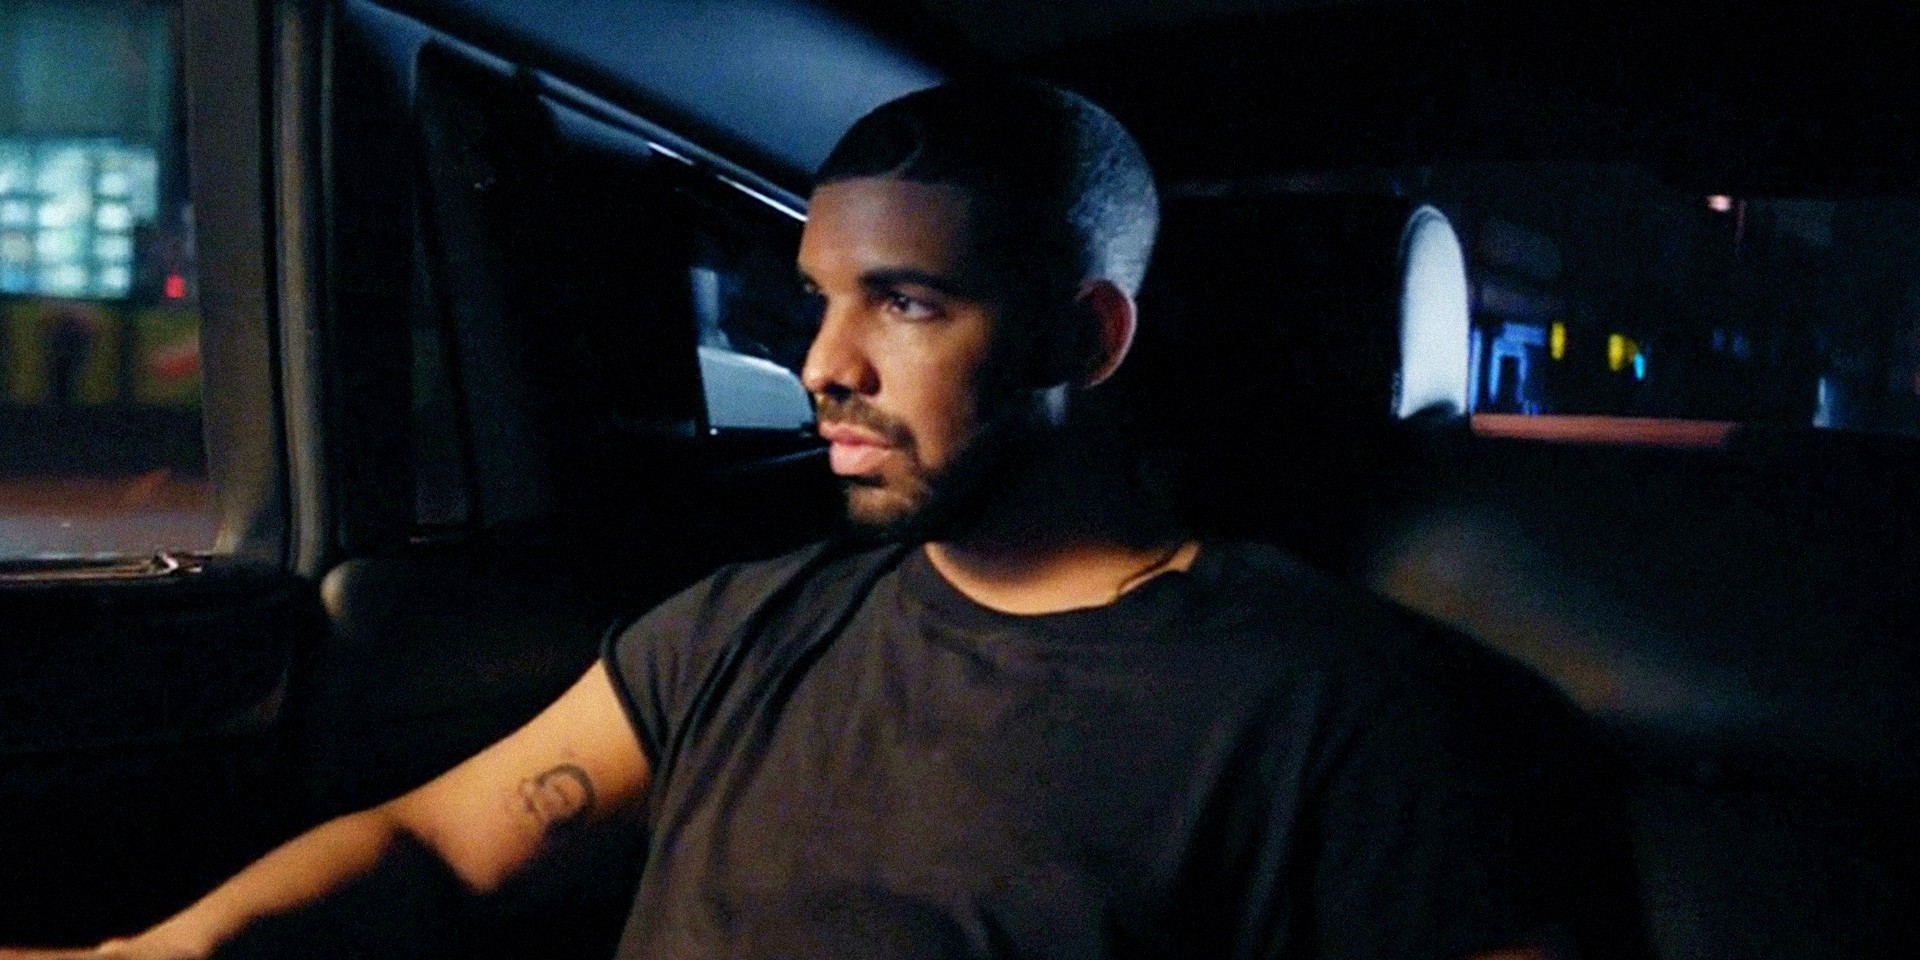 Drake releases a new two-track EP, and he's already come under fire for the artwork